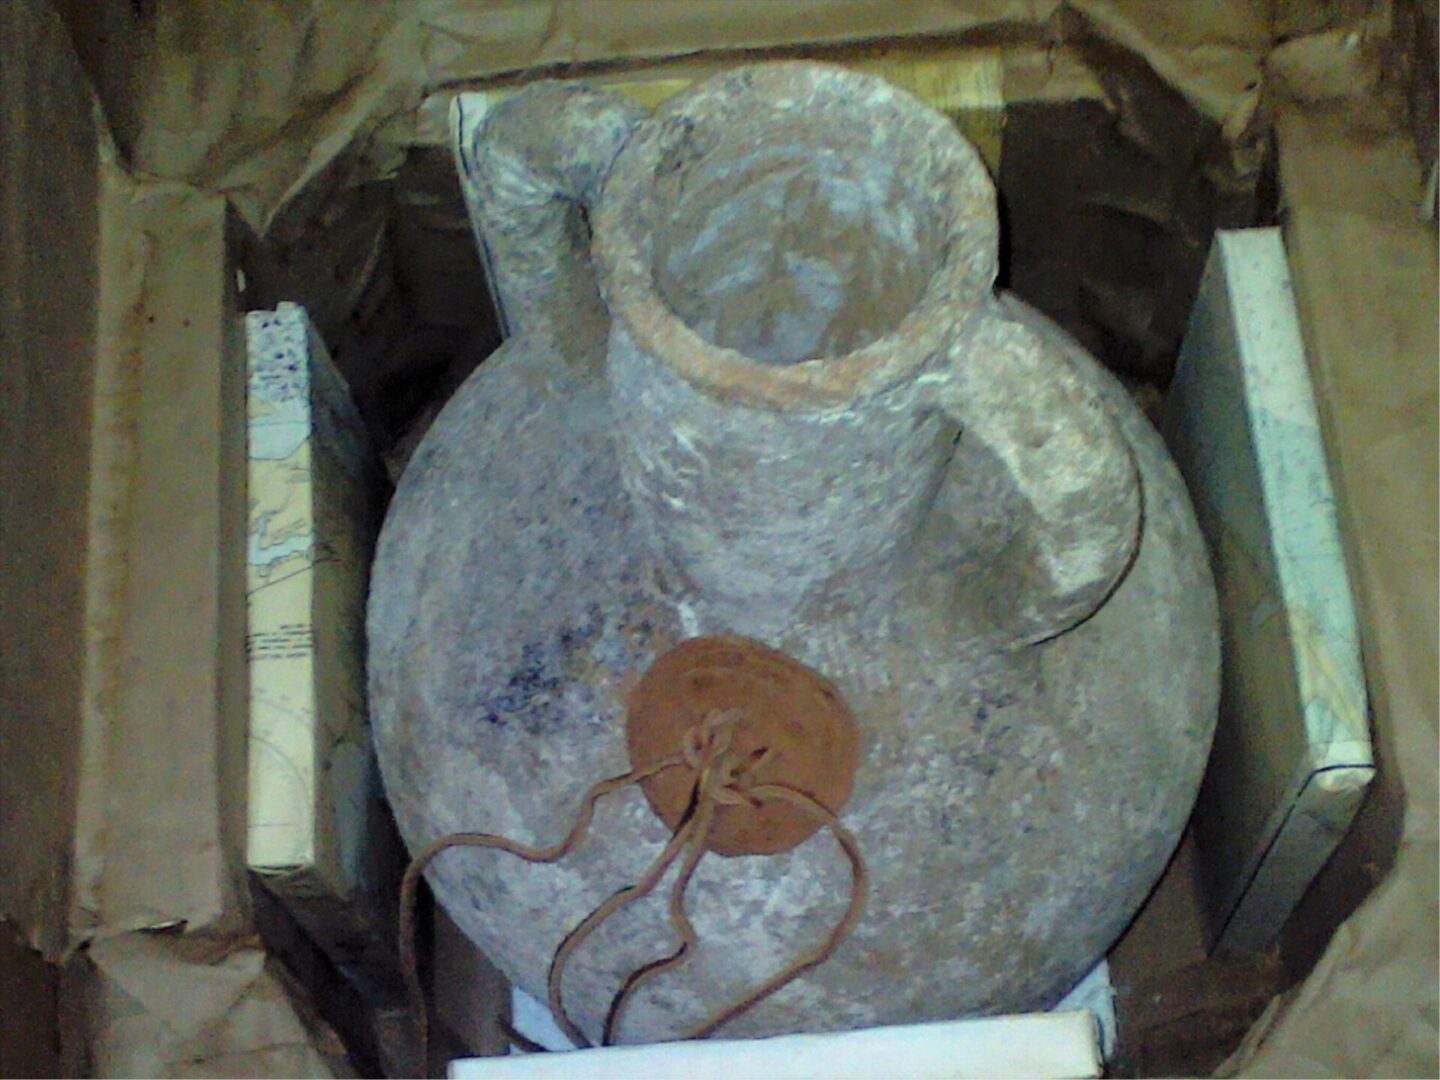 Pic 2,300 BC Amphora before Fedexed to DC 2018